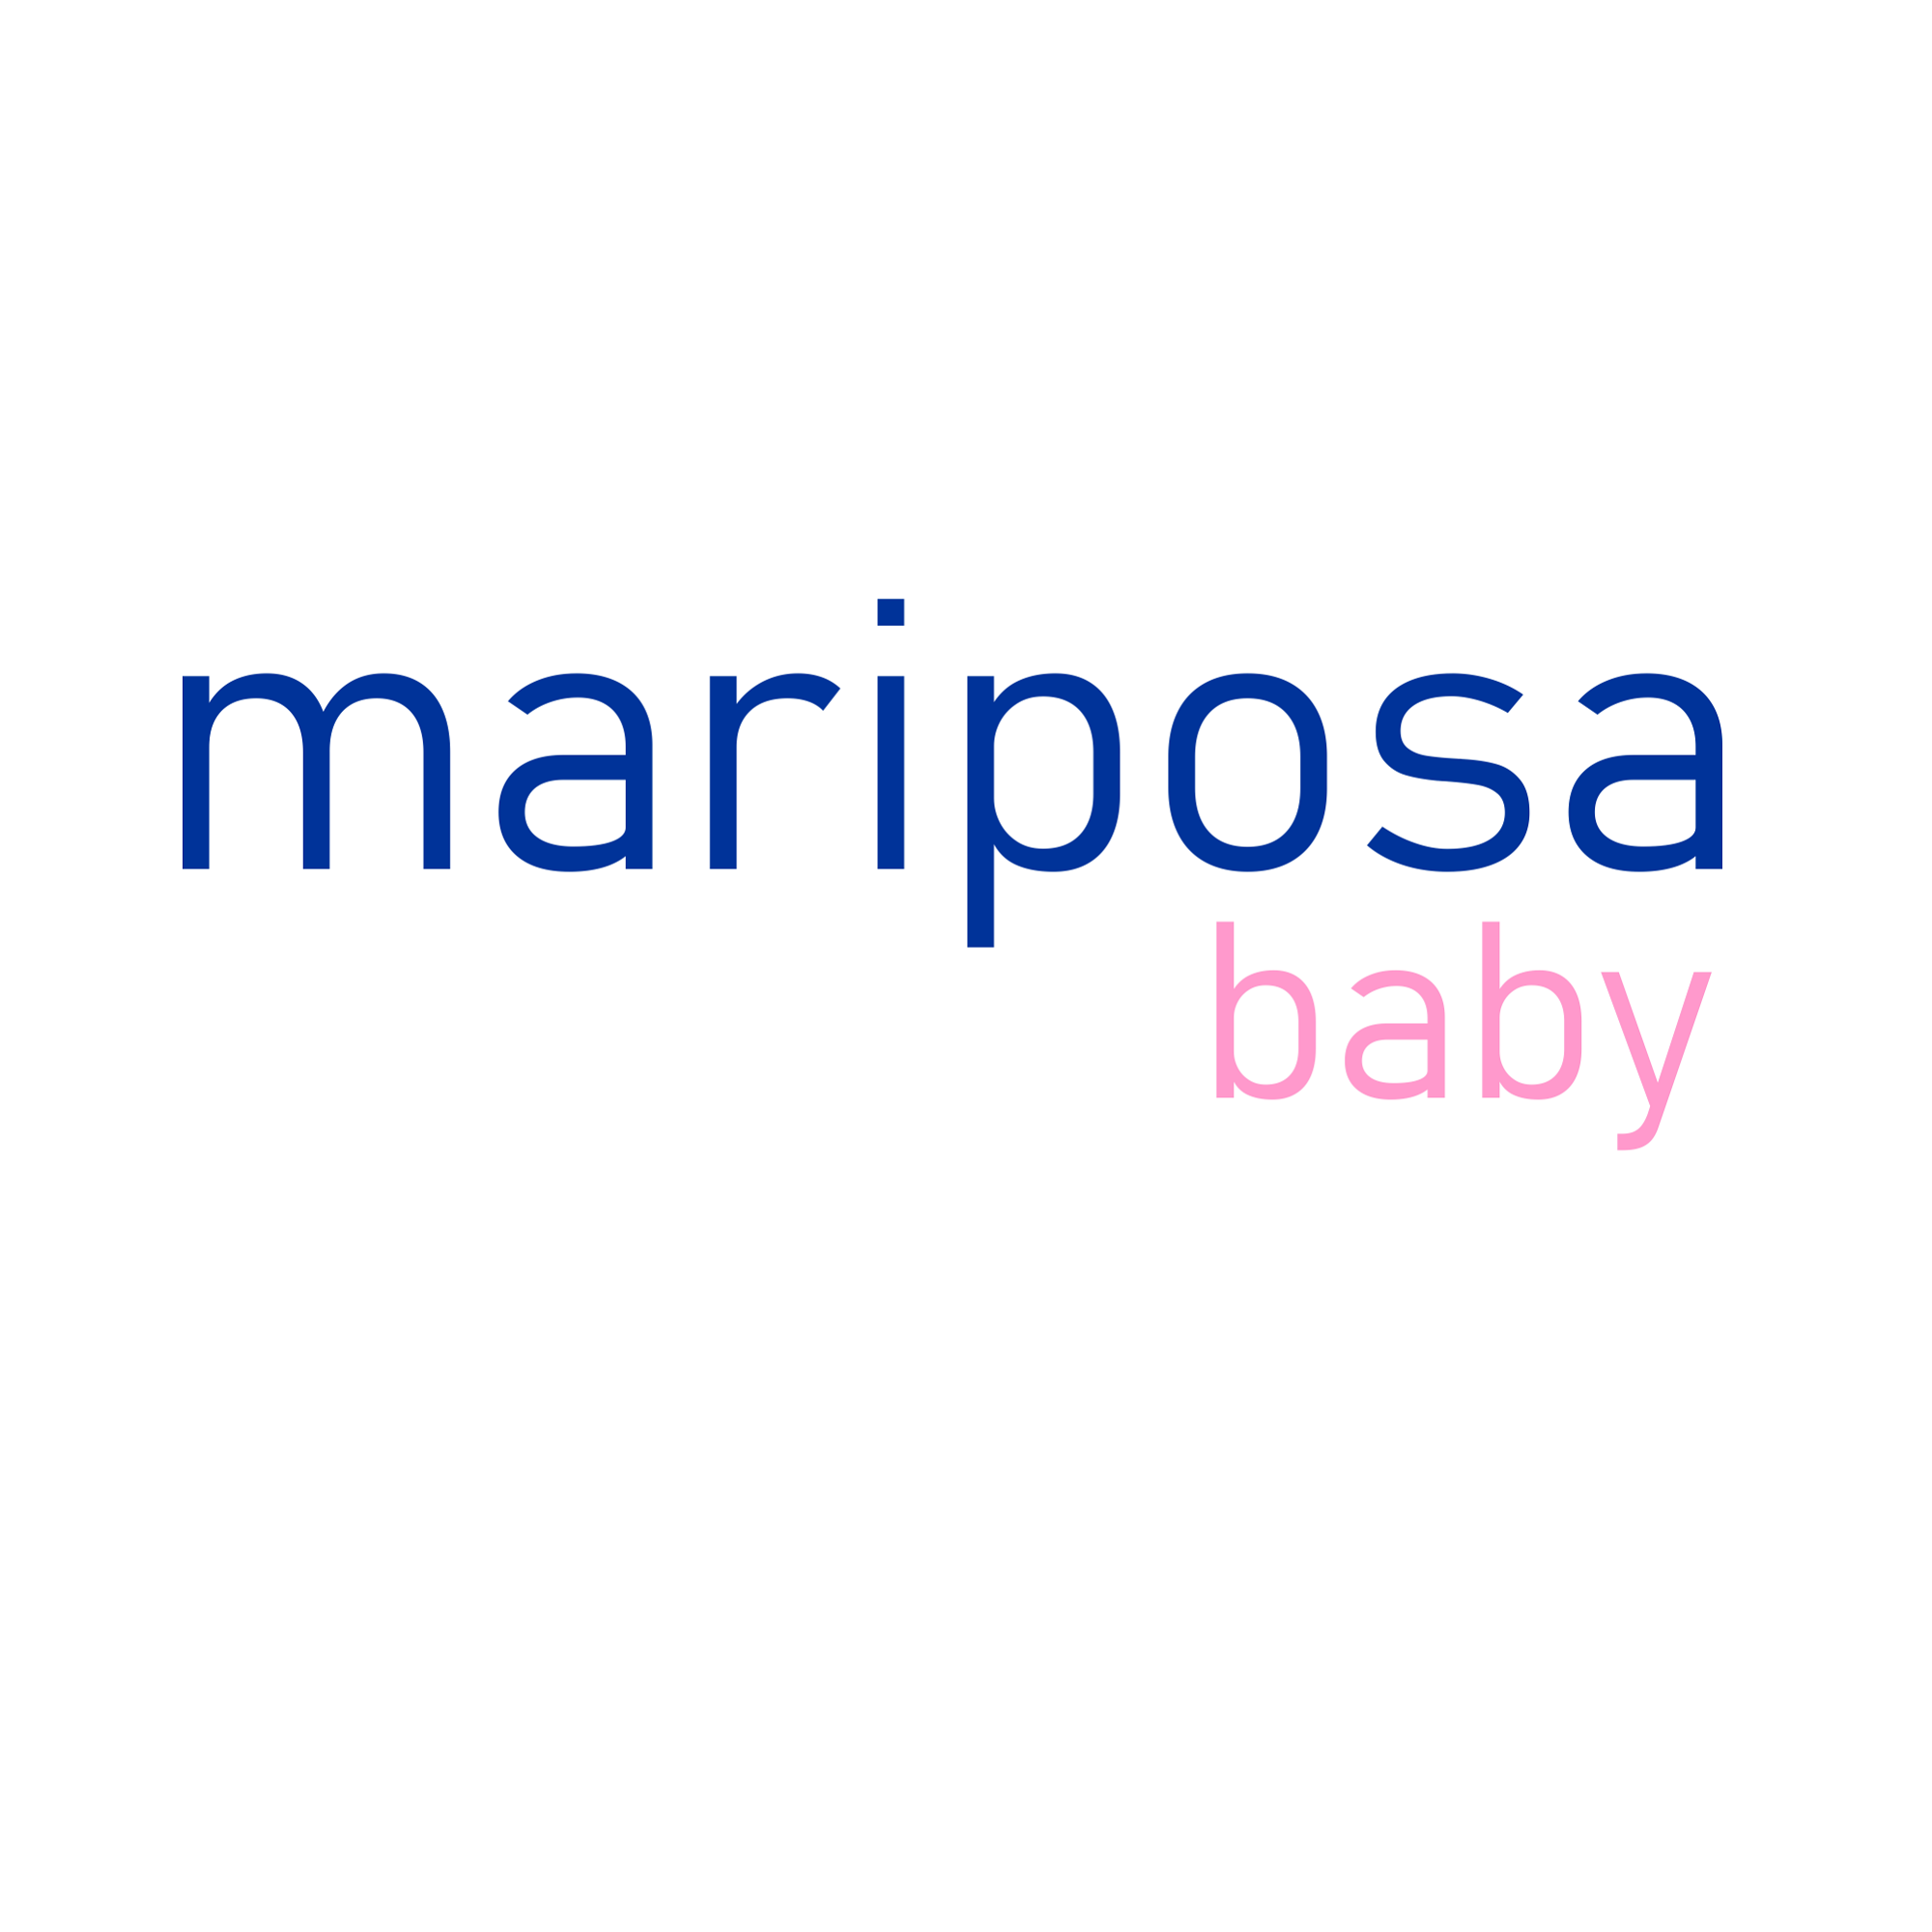 Art for Mariposa Baby Ad by MariposaBaby.co.uk